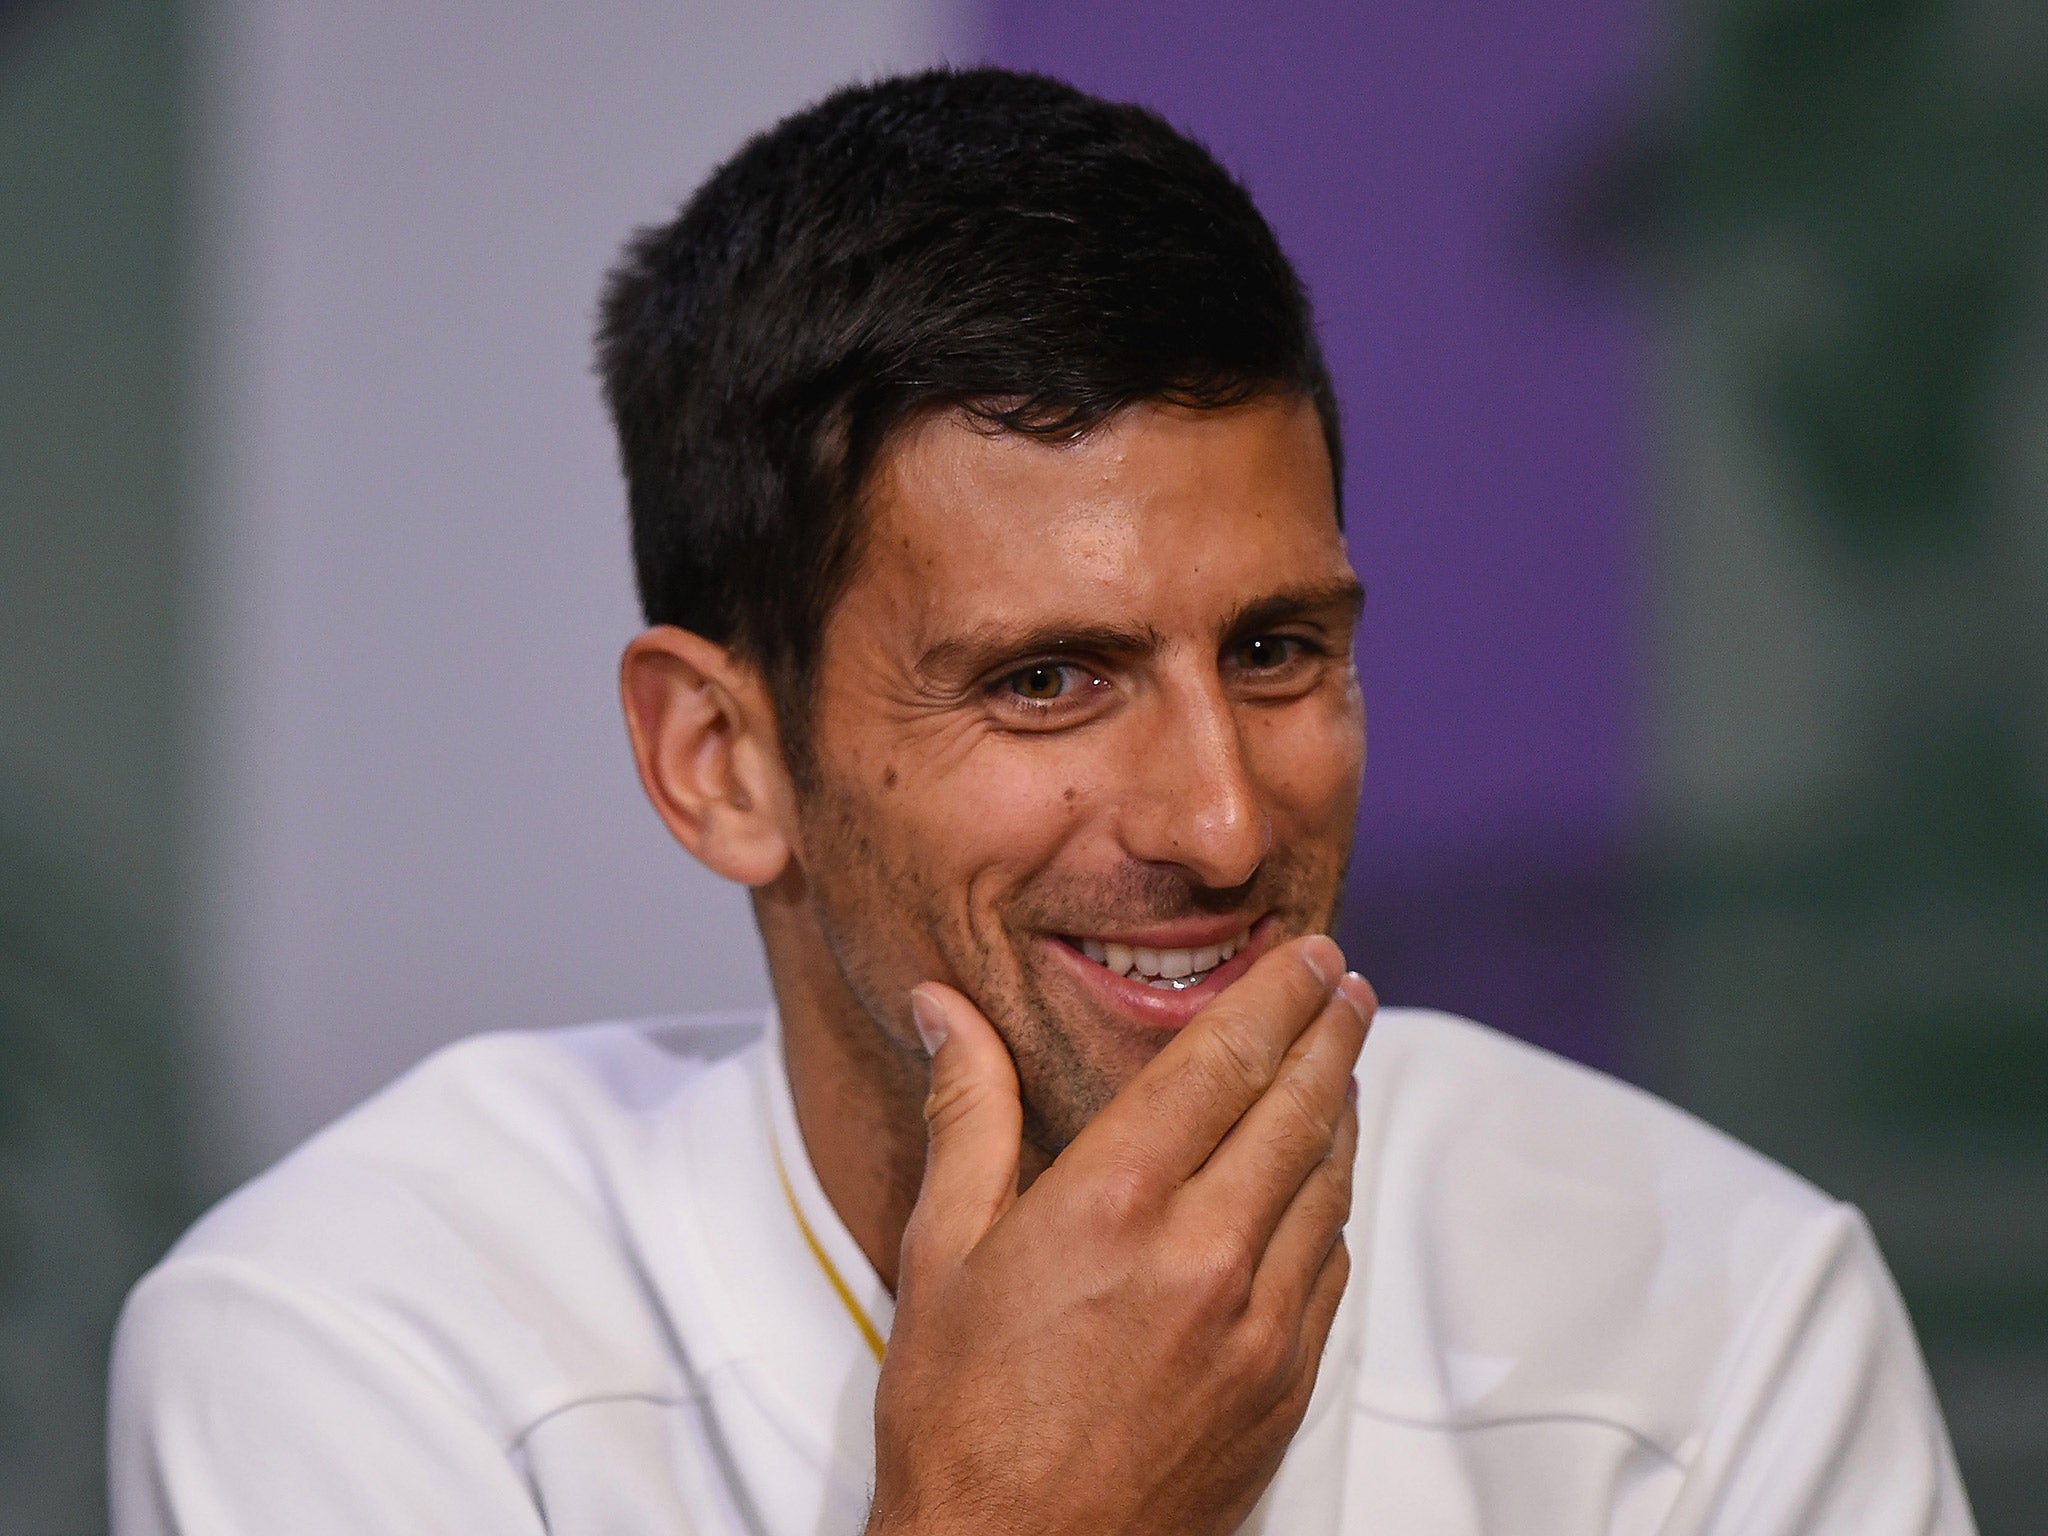 Novak Djokovic has no obvious weaknesses but if he is to lose at Wimbledon it will be early in the first week